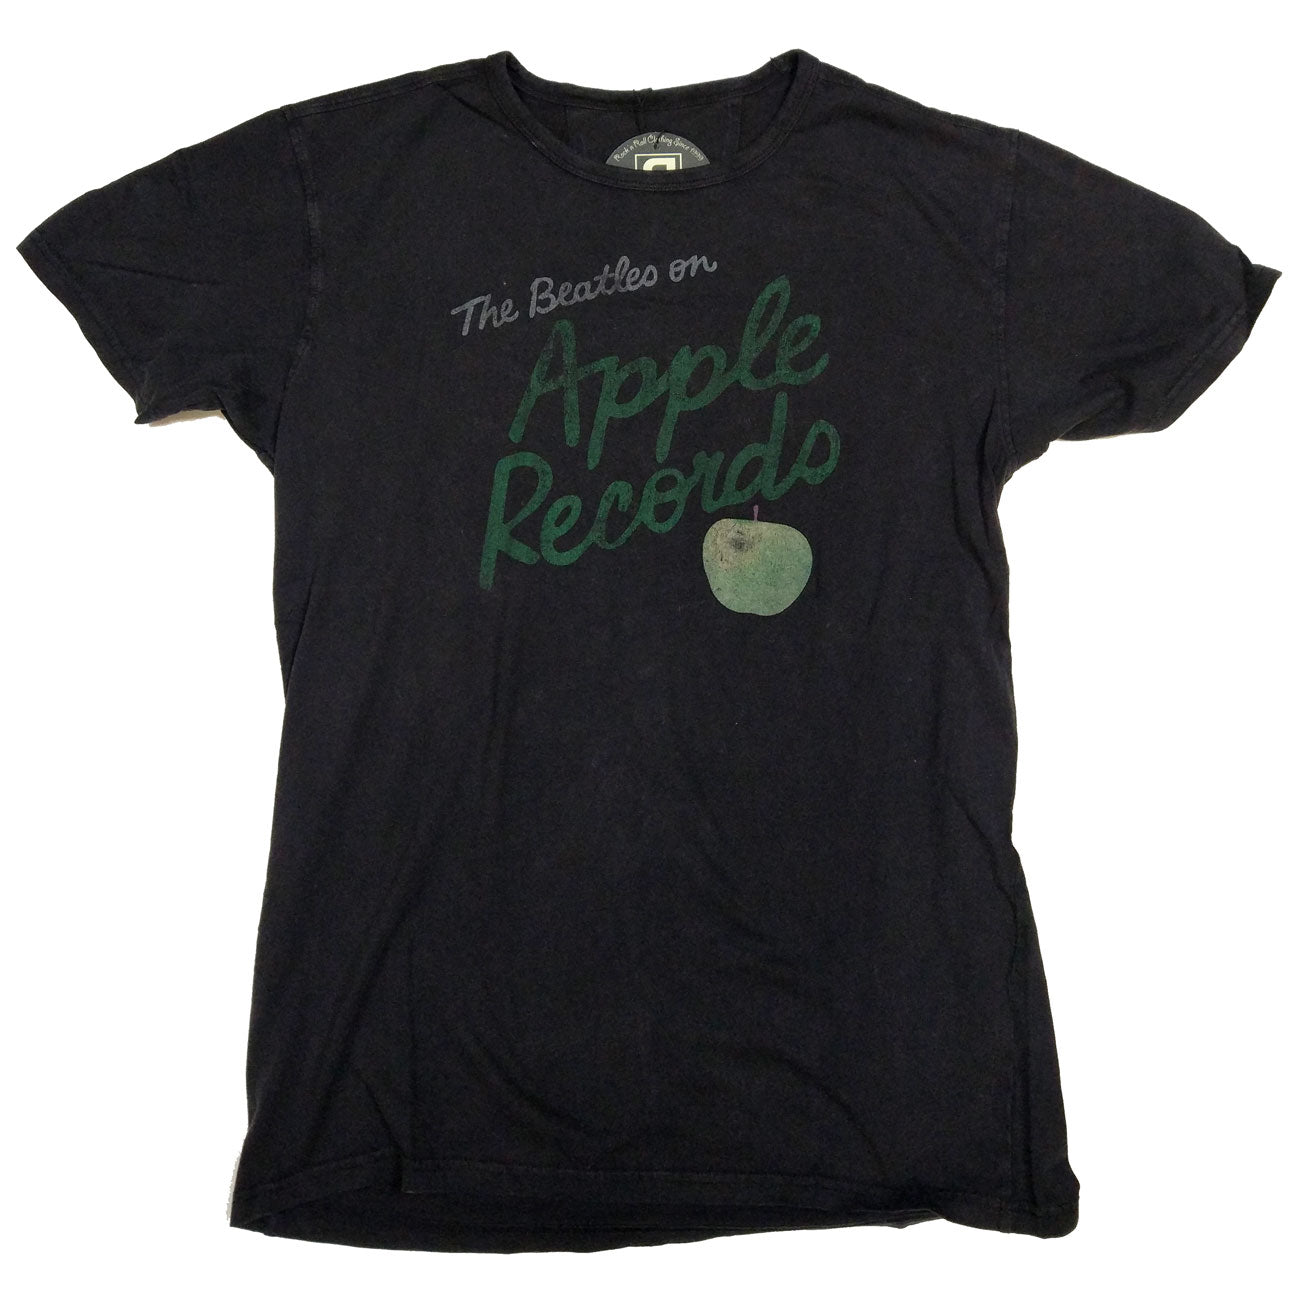 The Beatles T Shirt - Apple Records 100% Official Retro Distressed Print